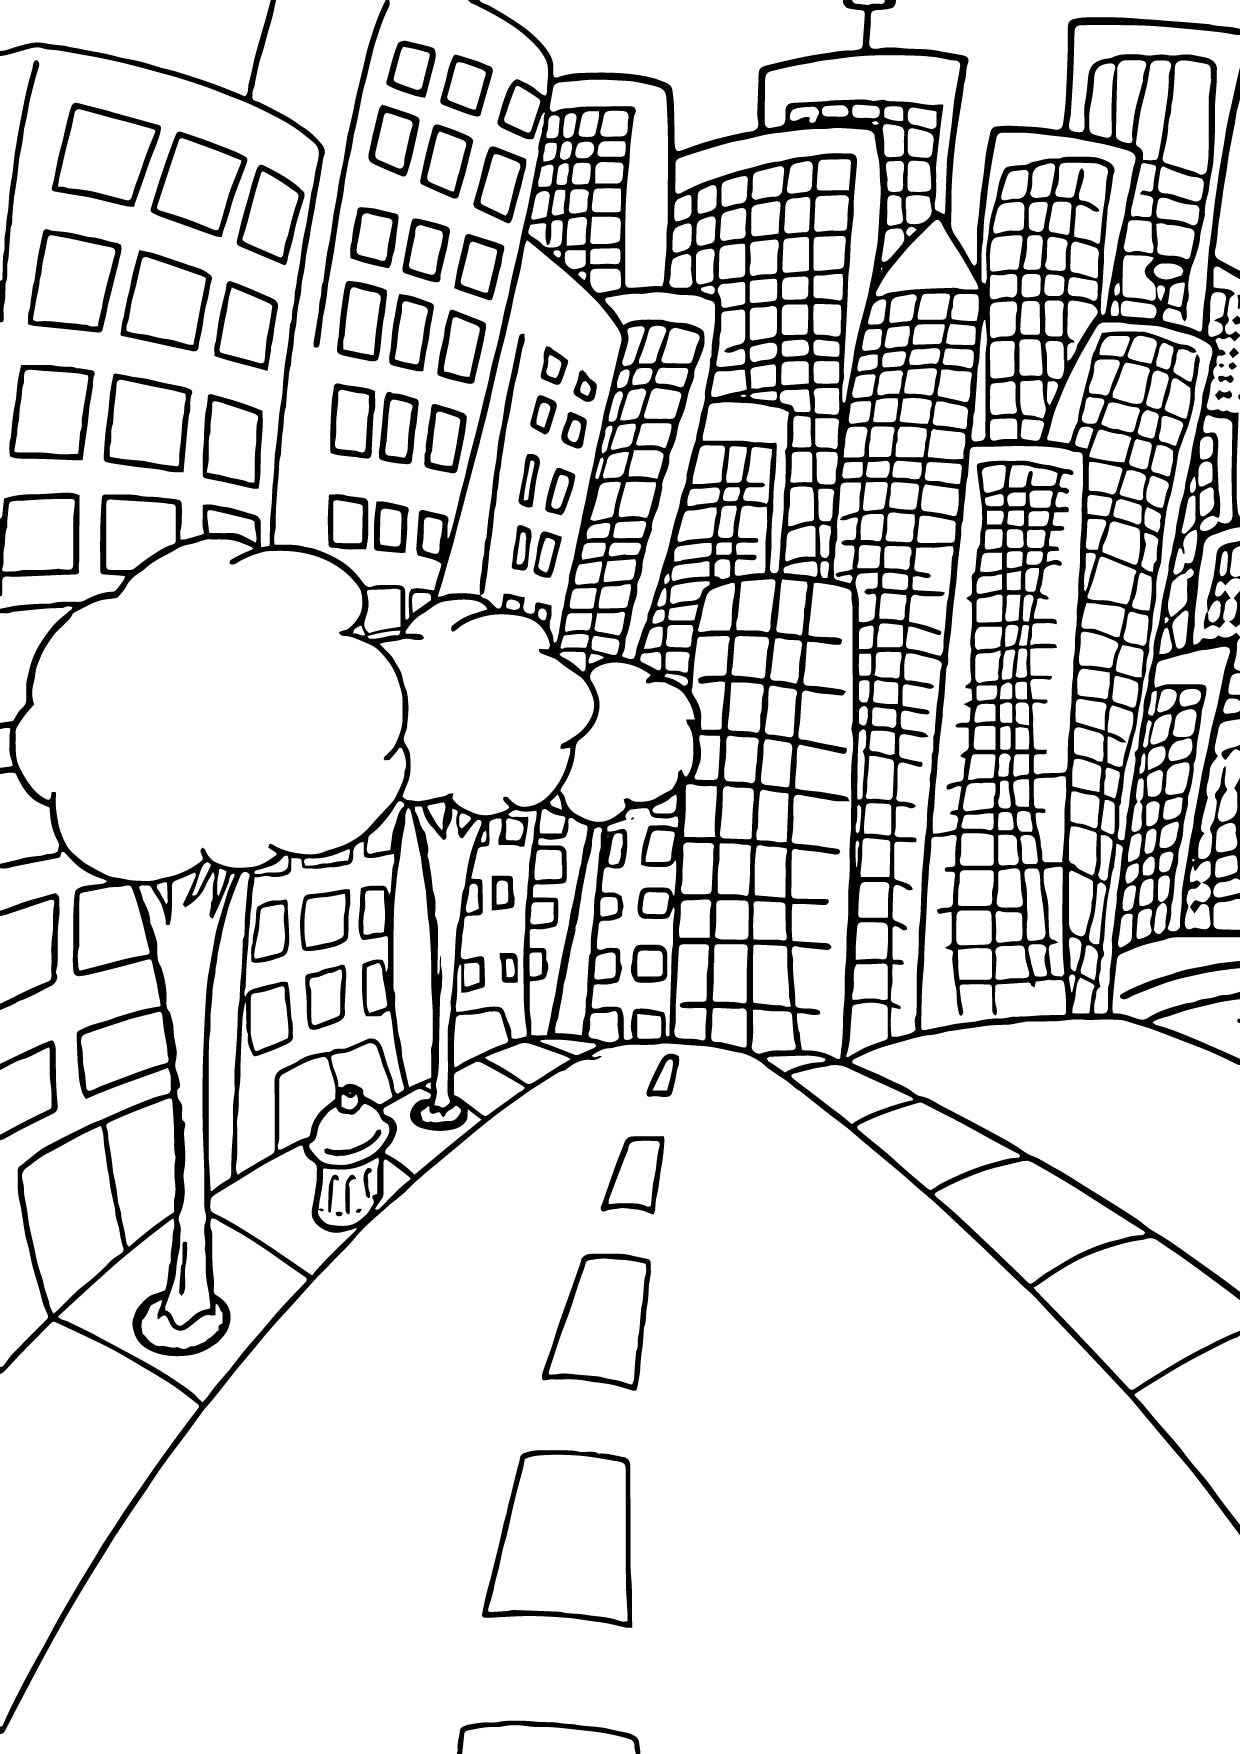 City Skyline Coloring Page at GetColorings.com | Free printable